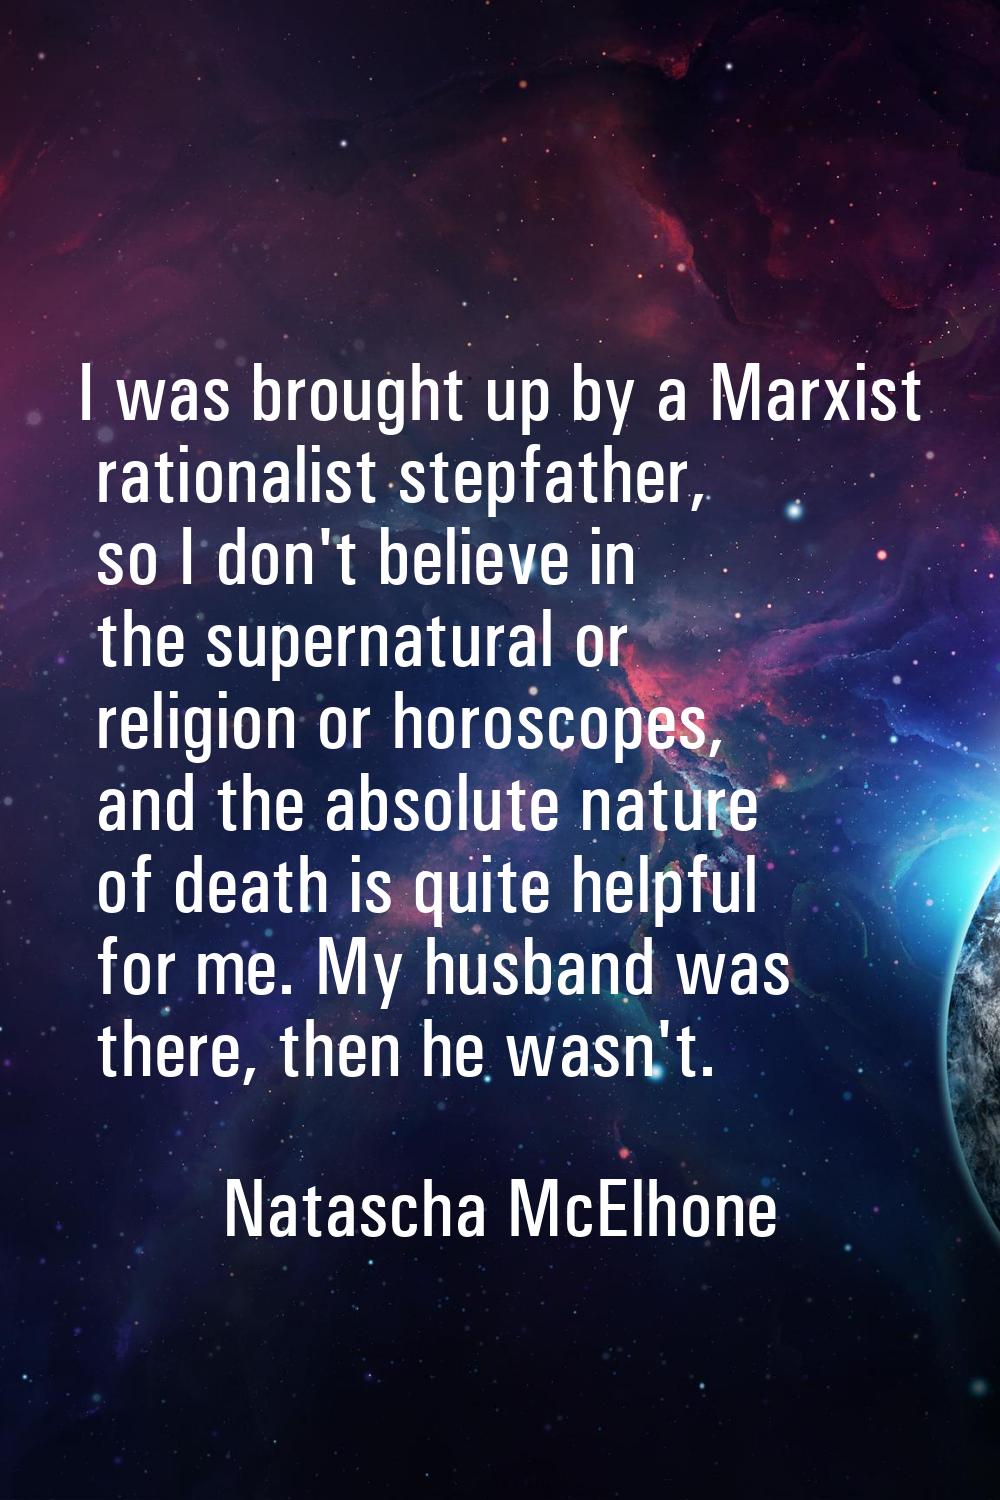 I was brought up by a Marxist rationalist stepfather, so I don't believe in the supernatural or rel